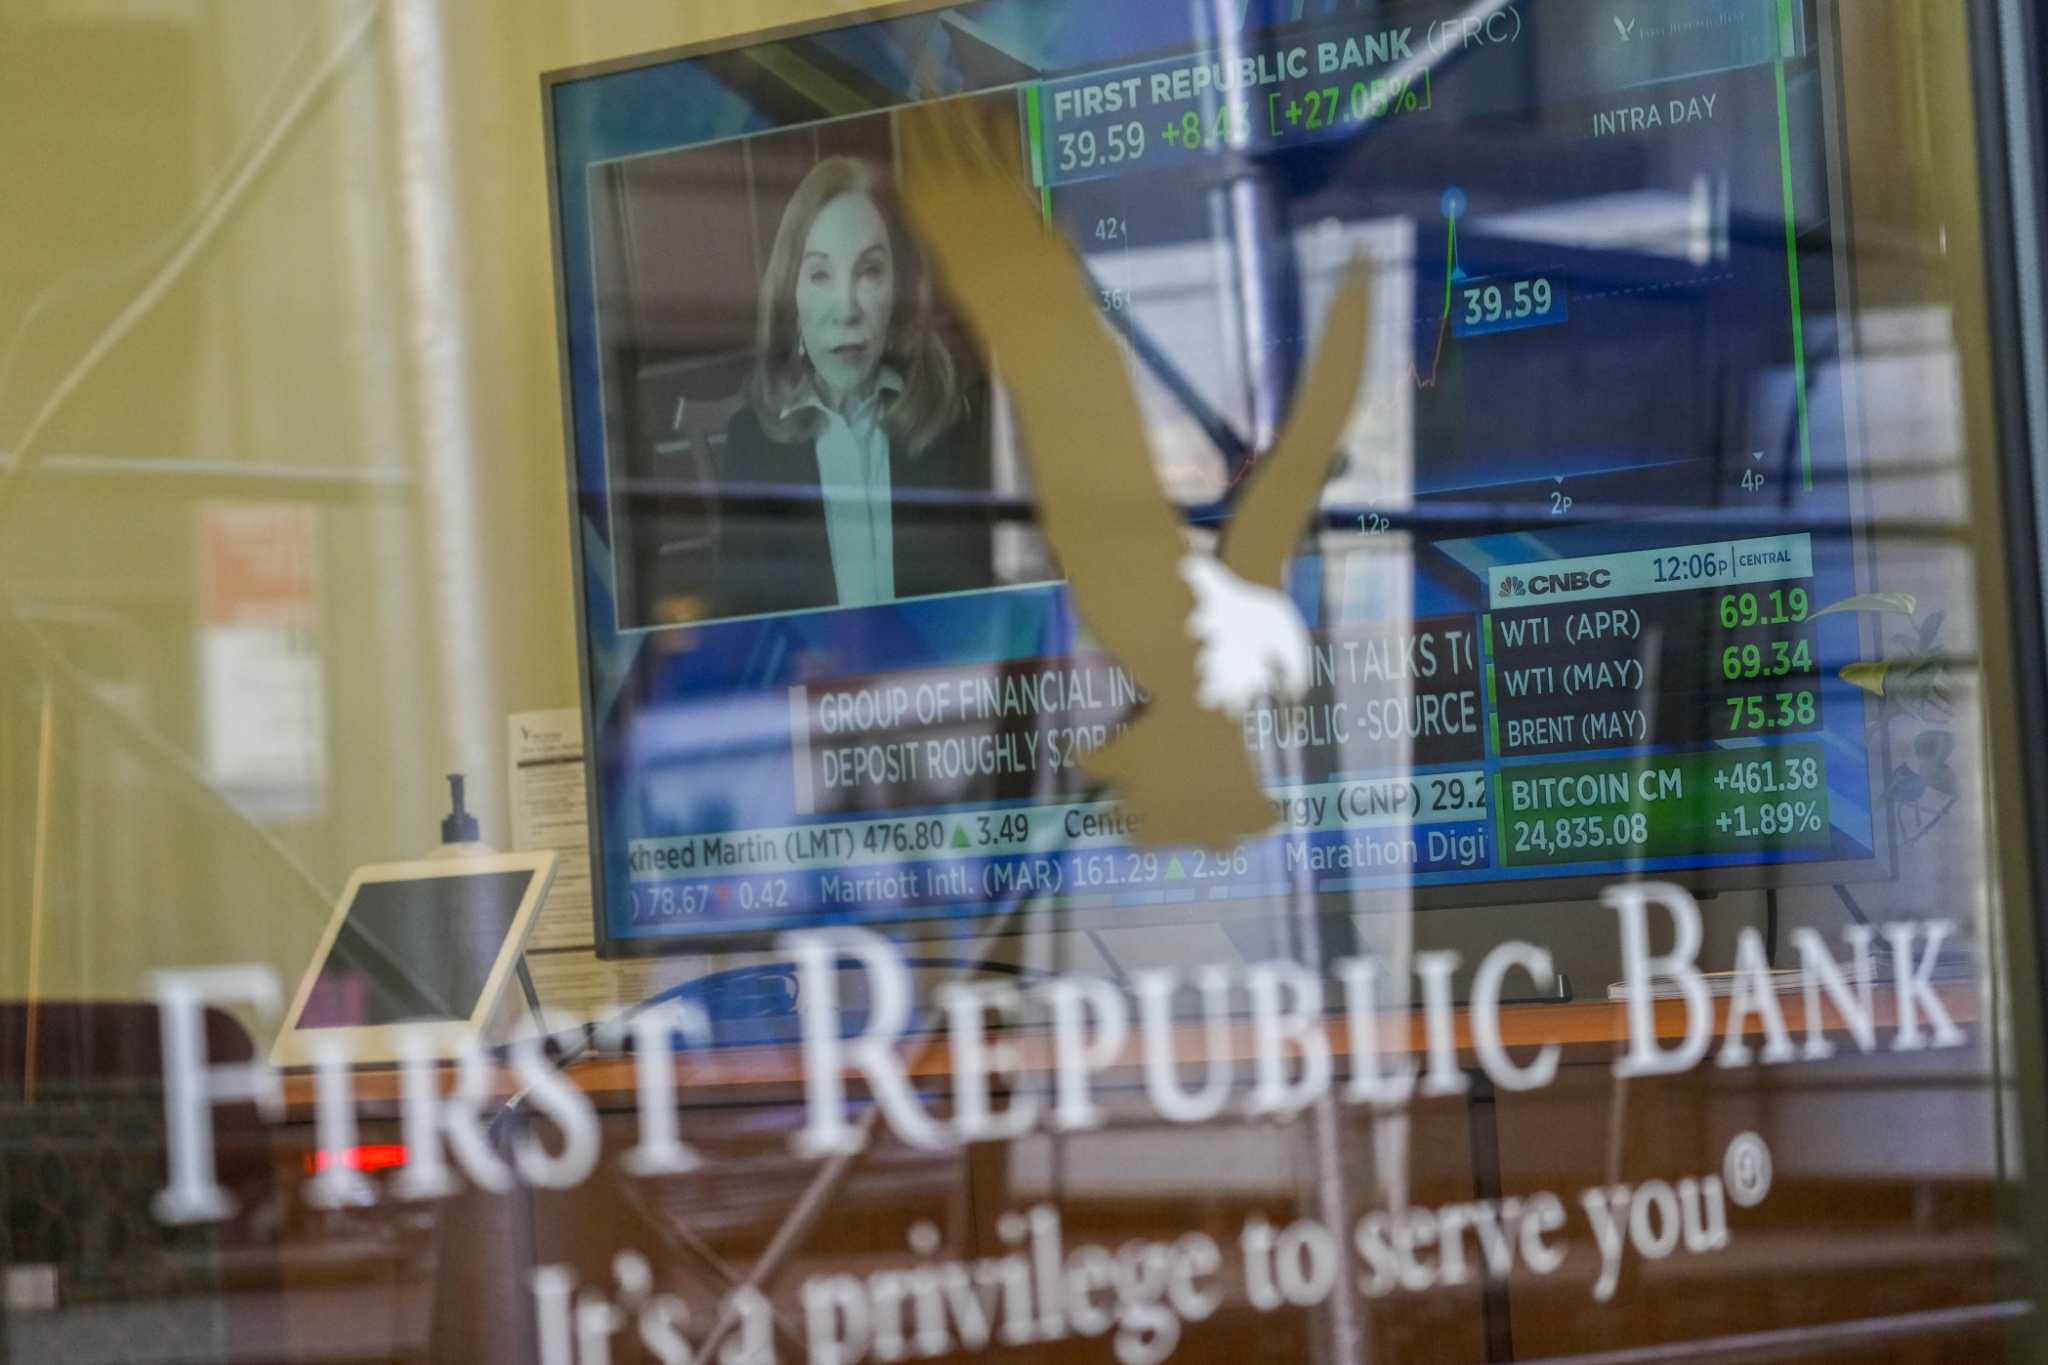 Credit rating for San Francisco’s First Republic Bank downgraded for second time in a week